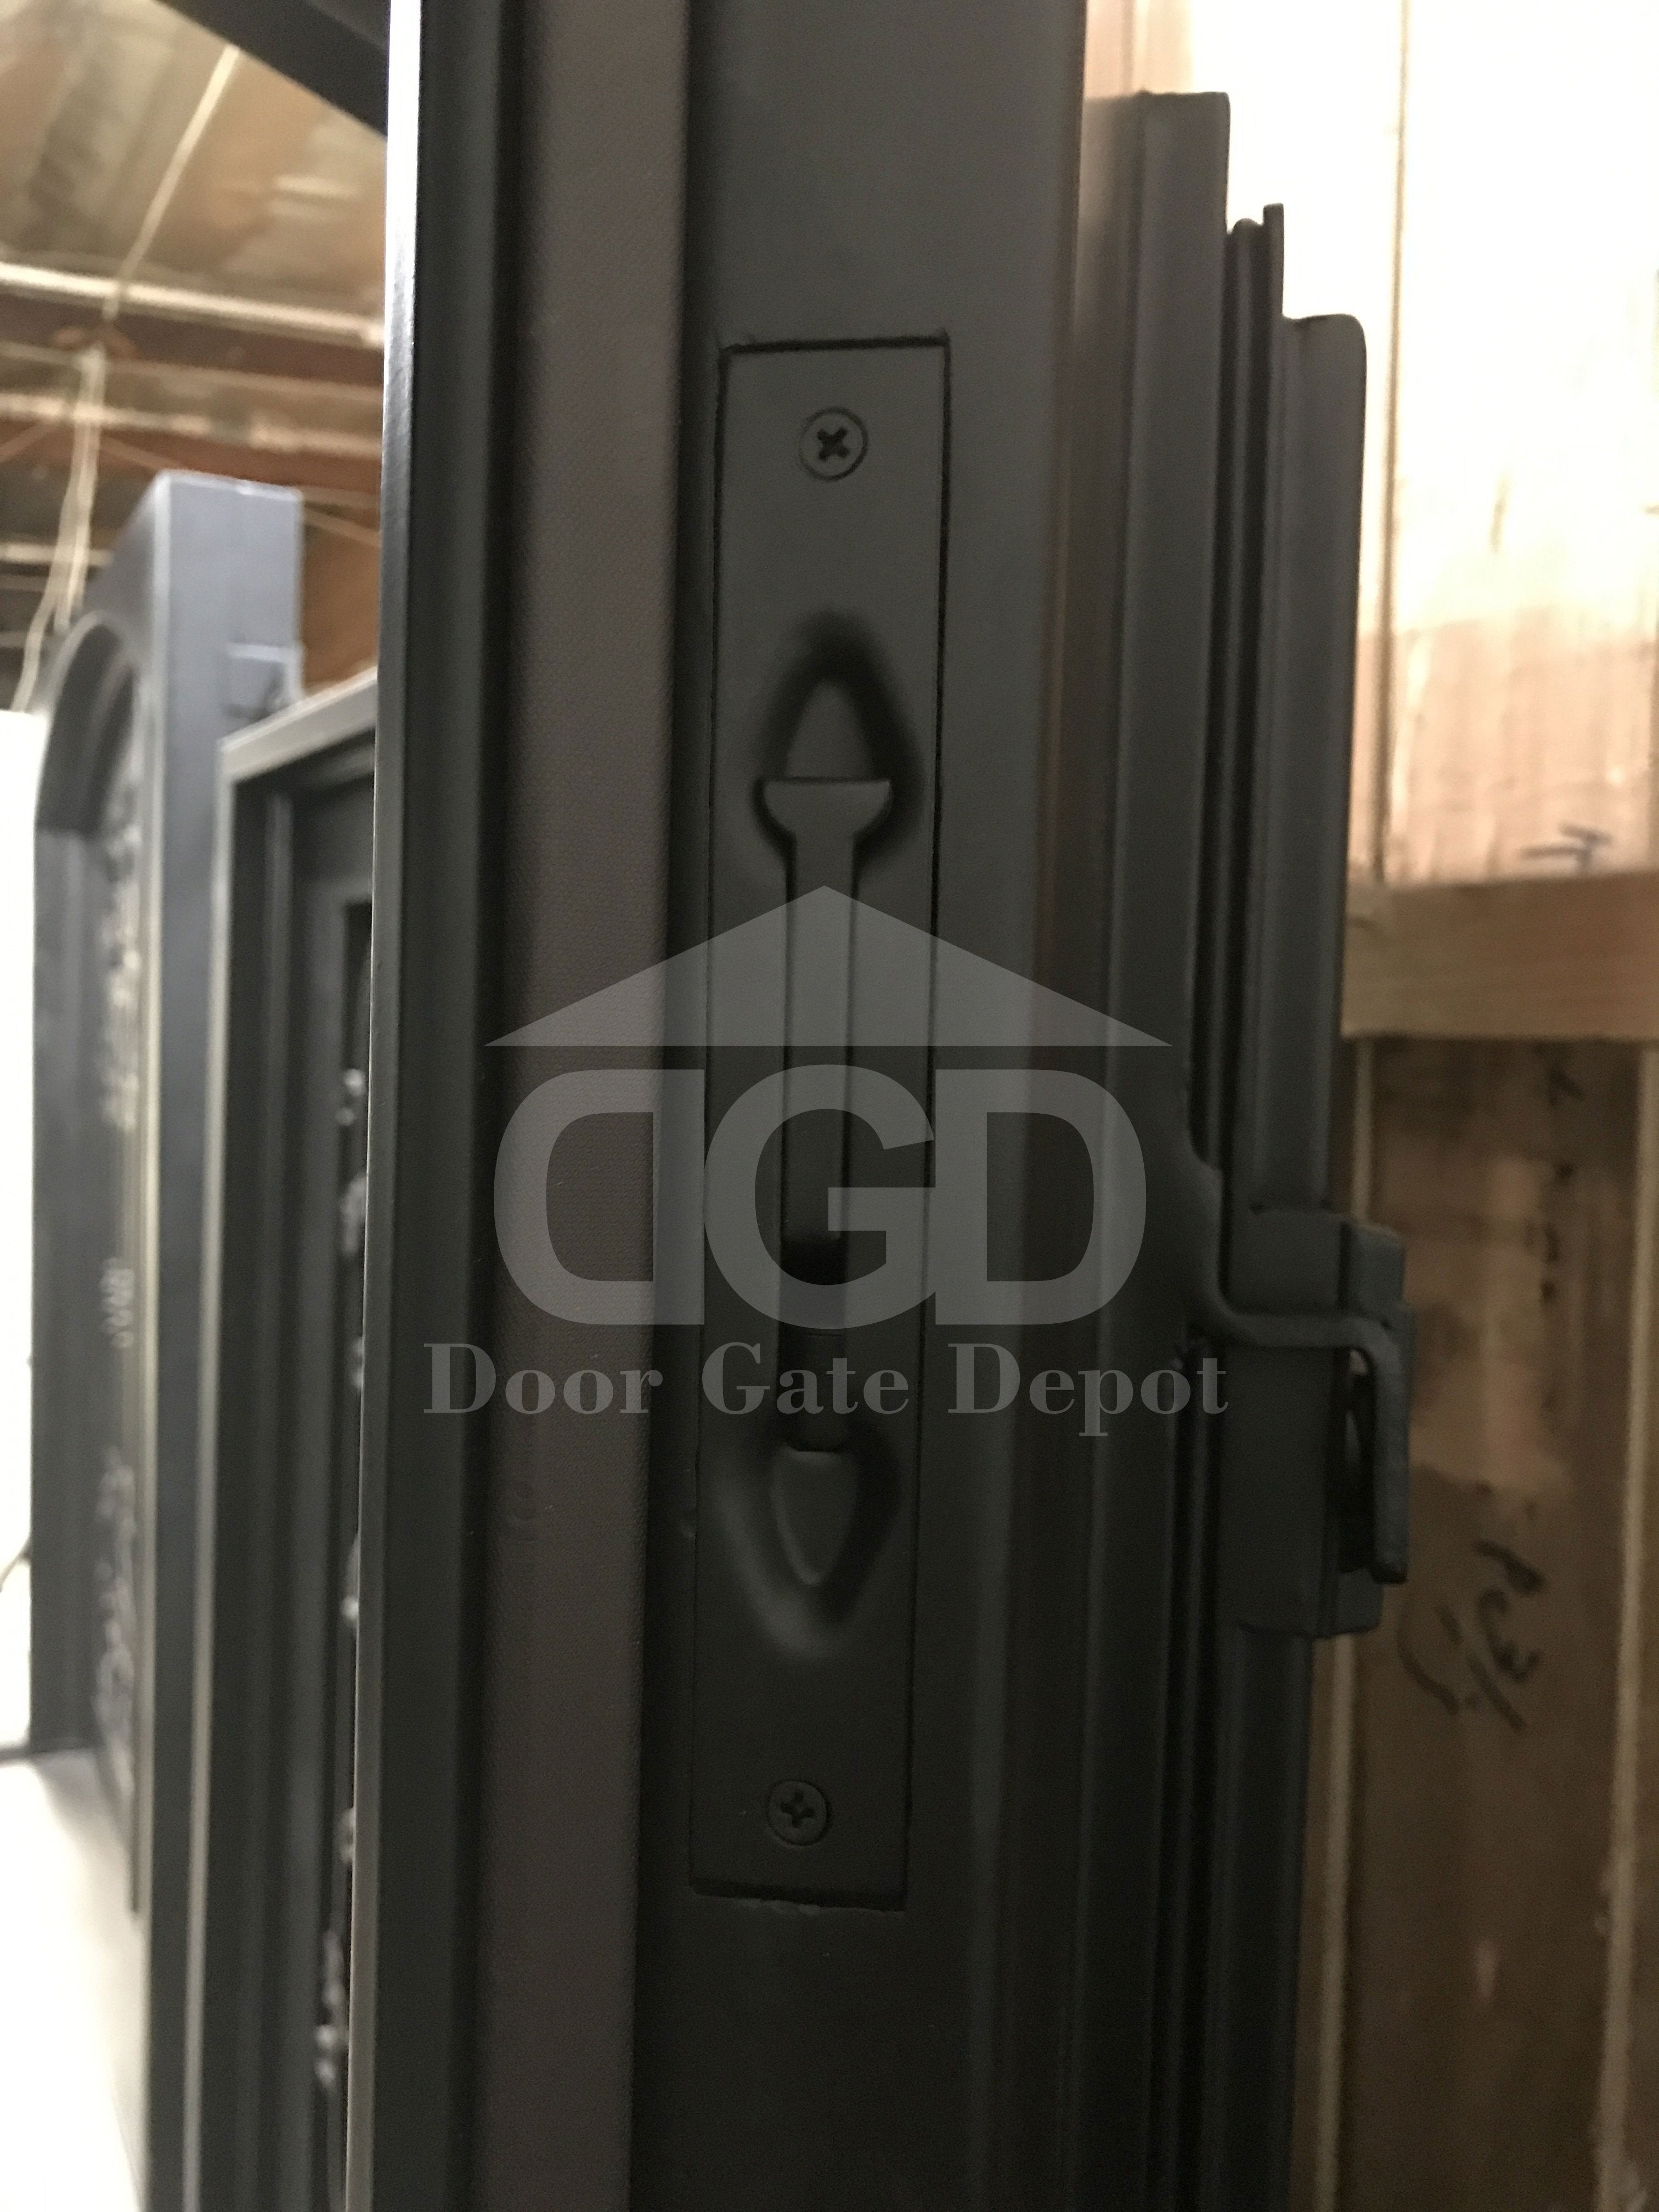 ORCHID -flat top, prehung, bug, screen, front entry single wrought iron door- 38x96 Right Hand - Door Gate Depot